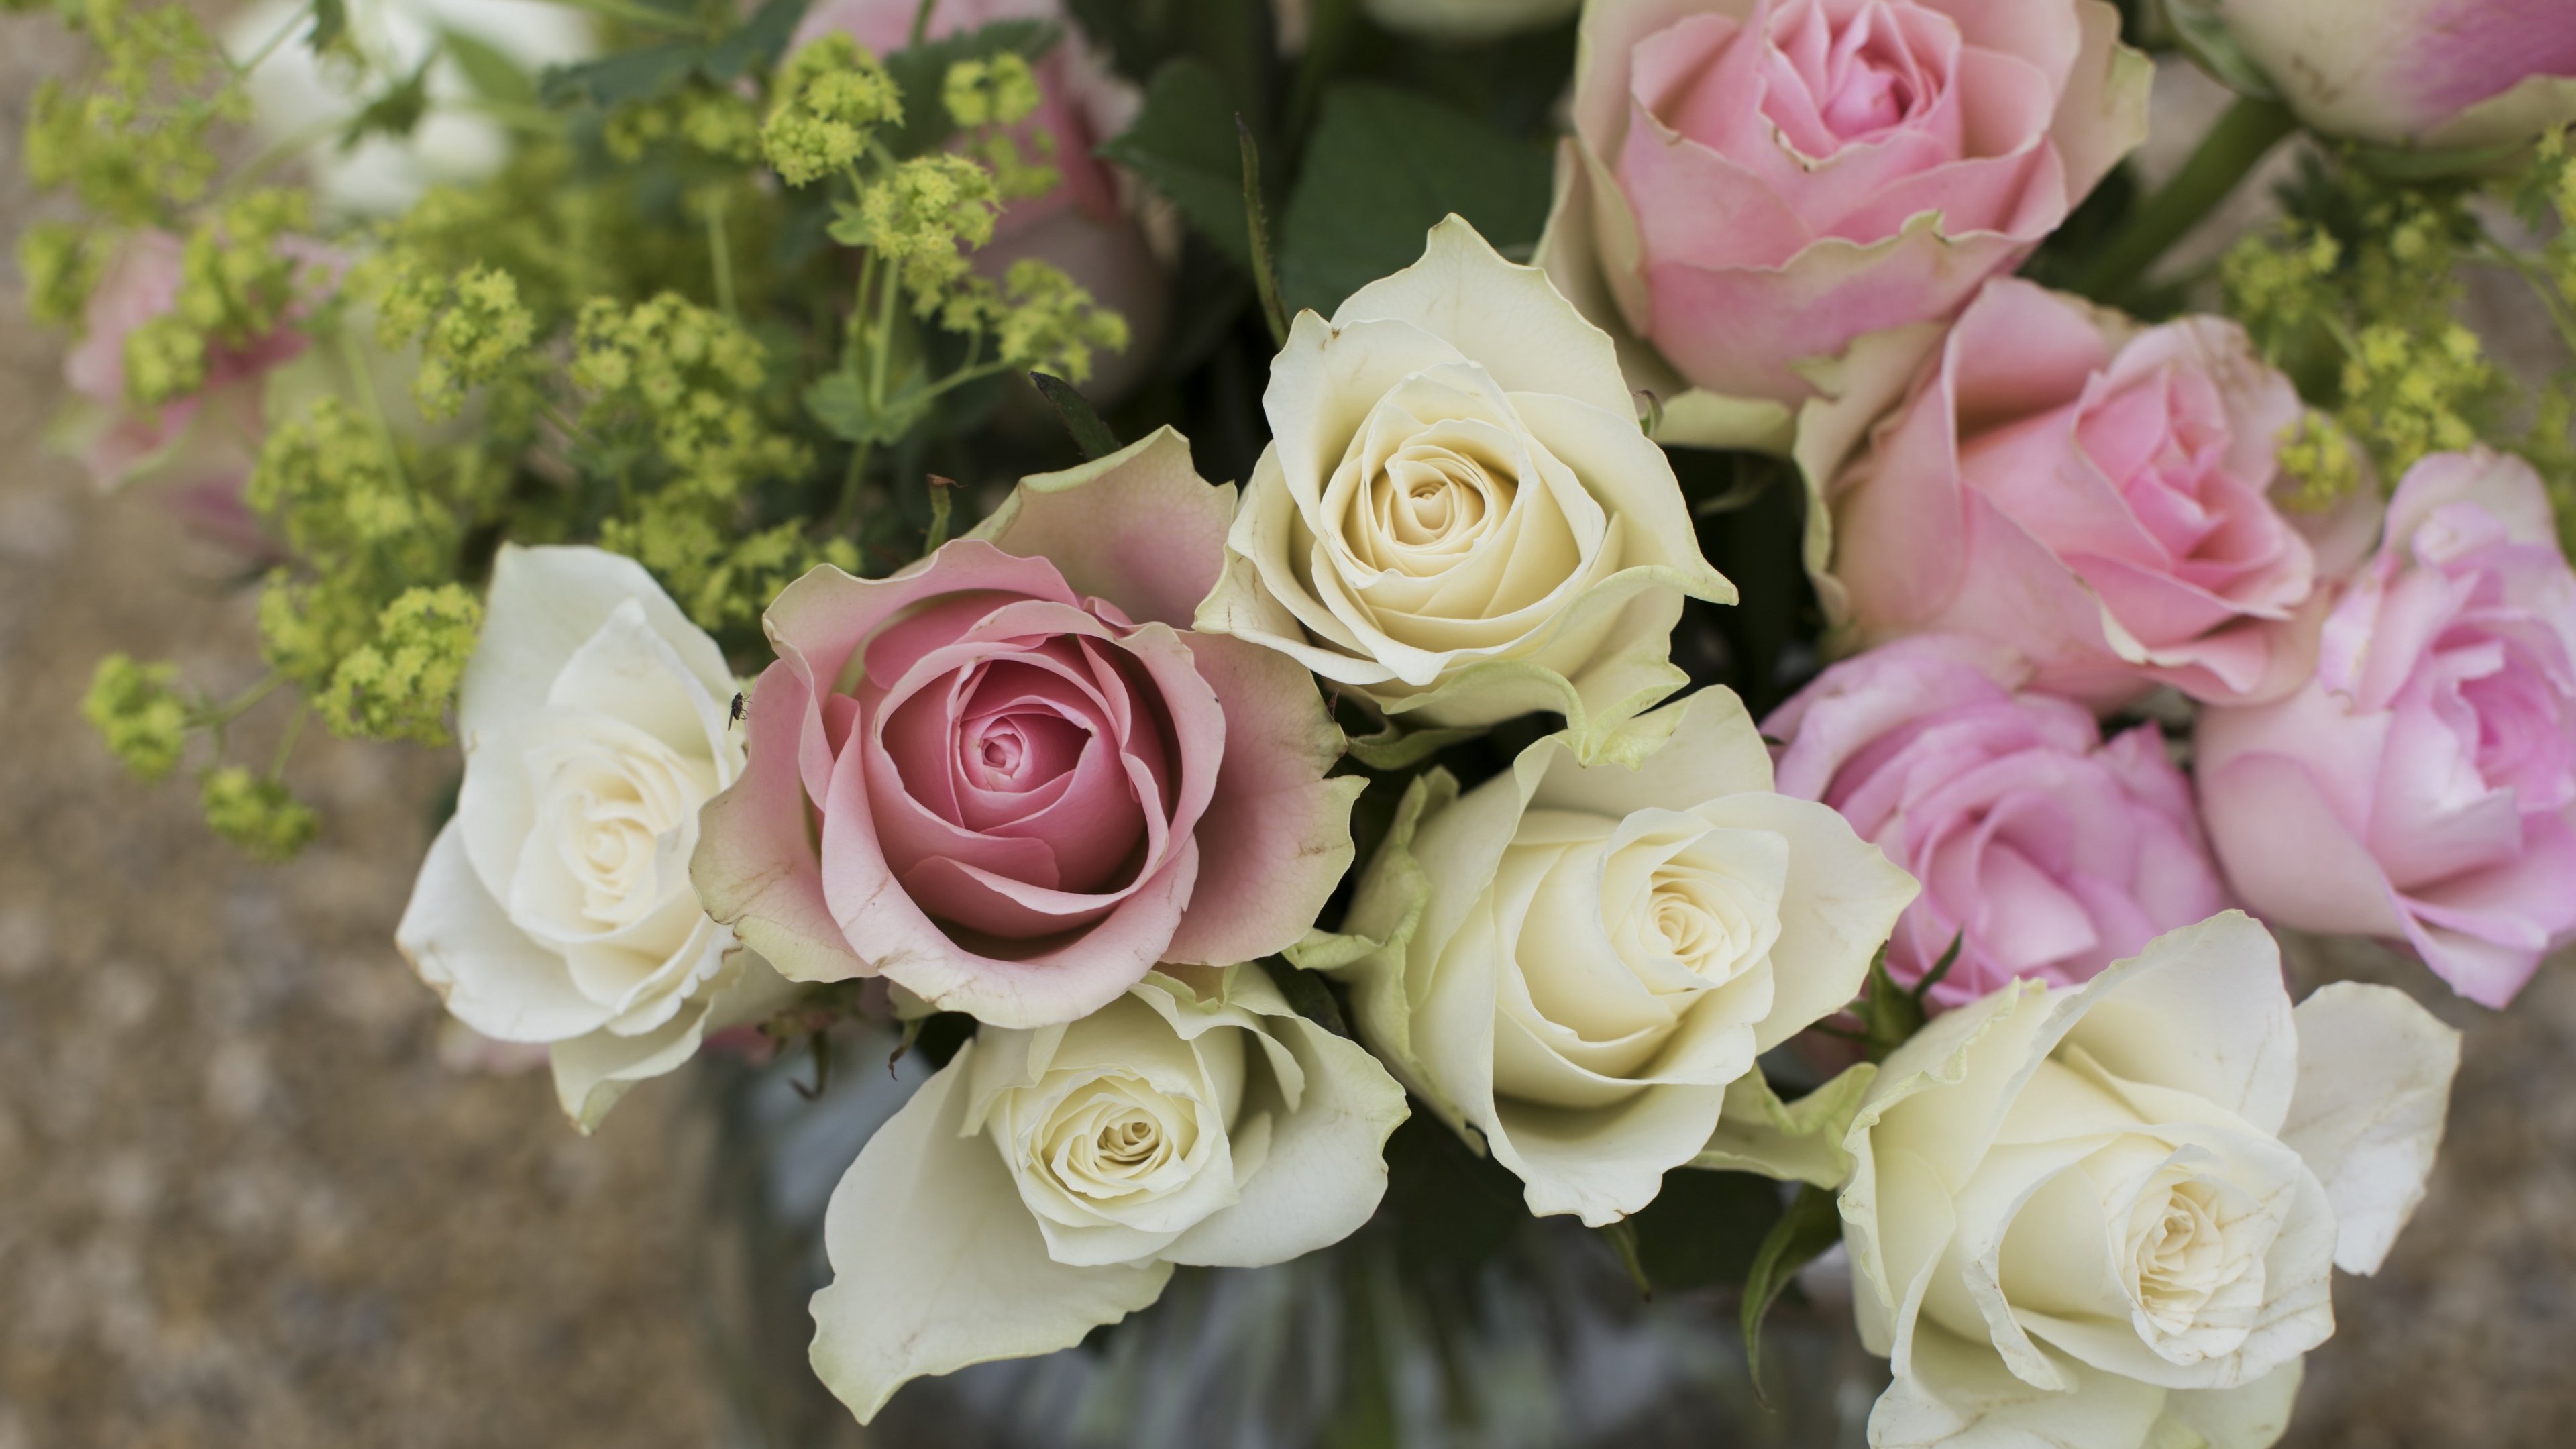 Pink and White Roses 4k Ultra HD Wallpaper | Background ...